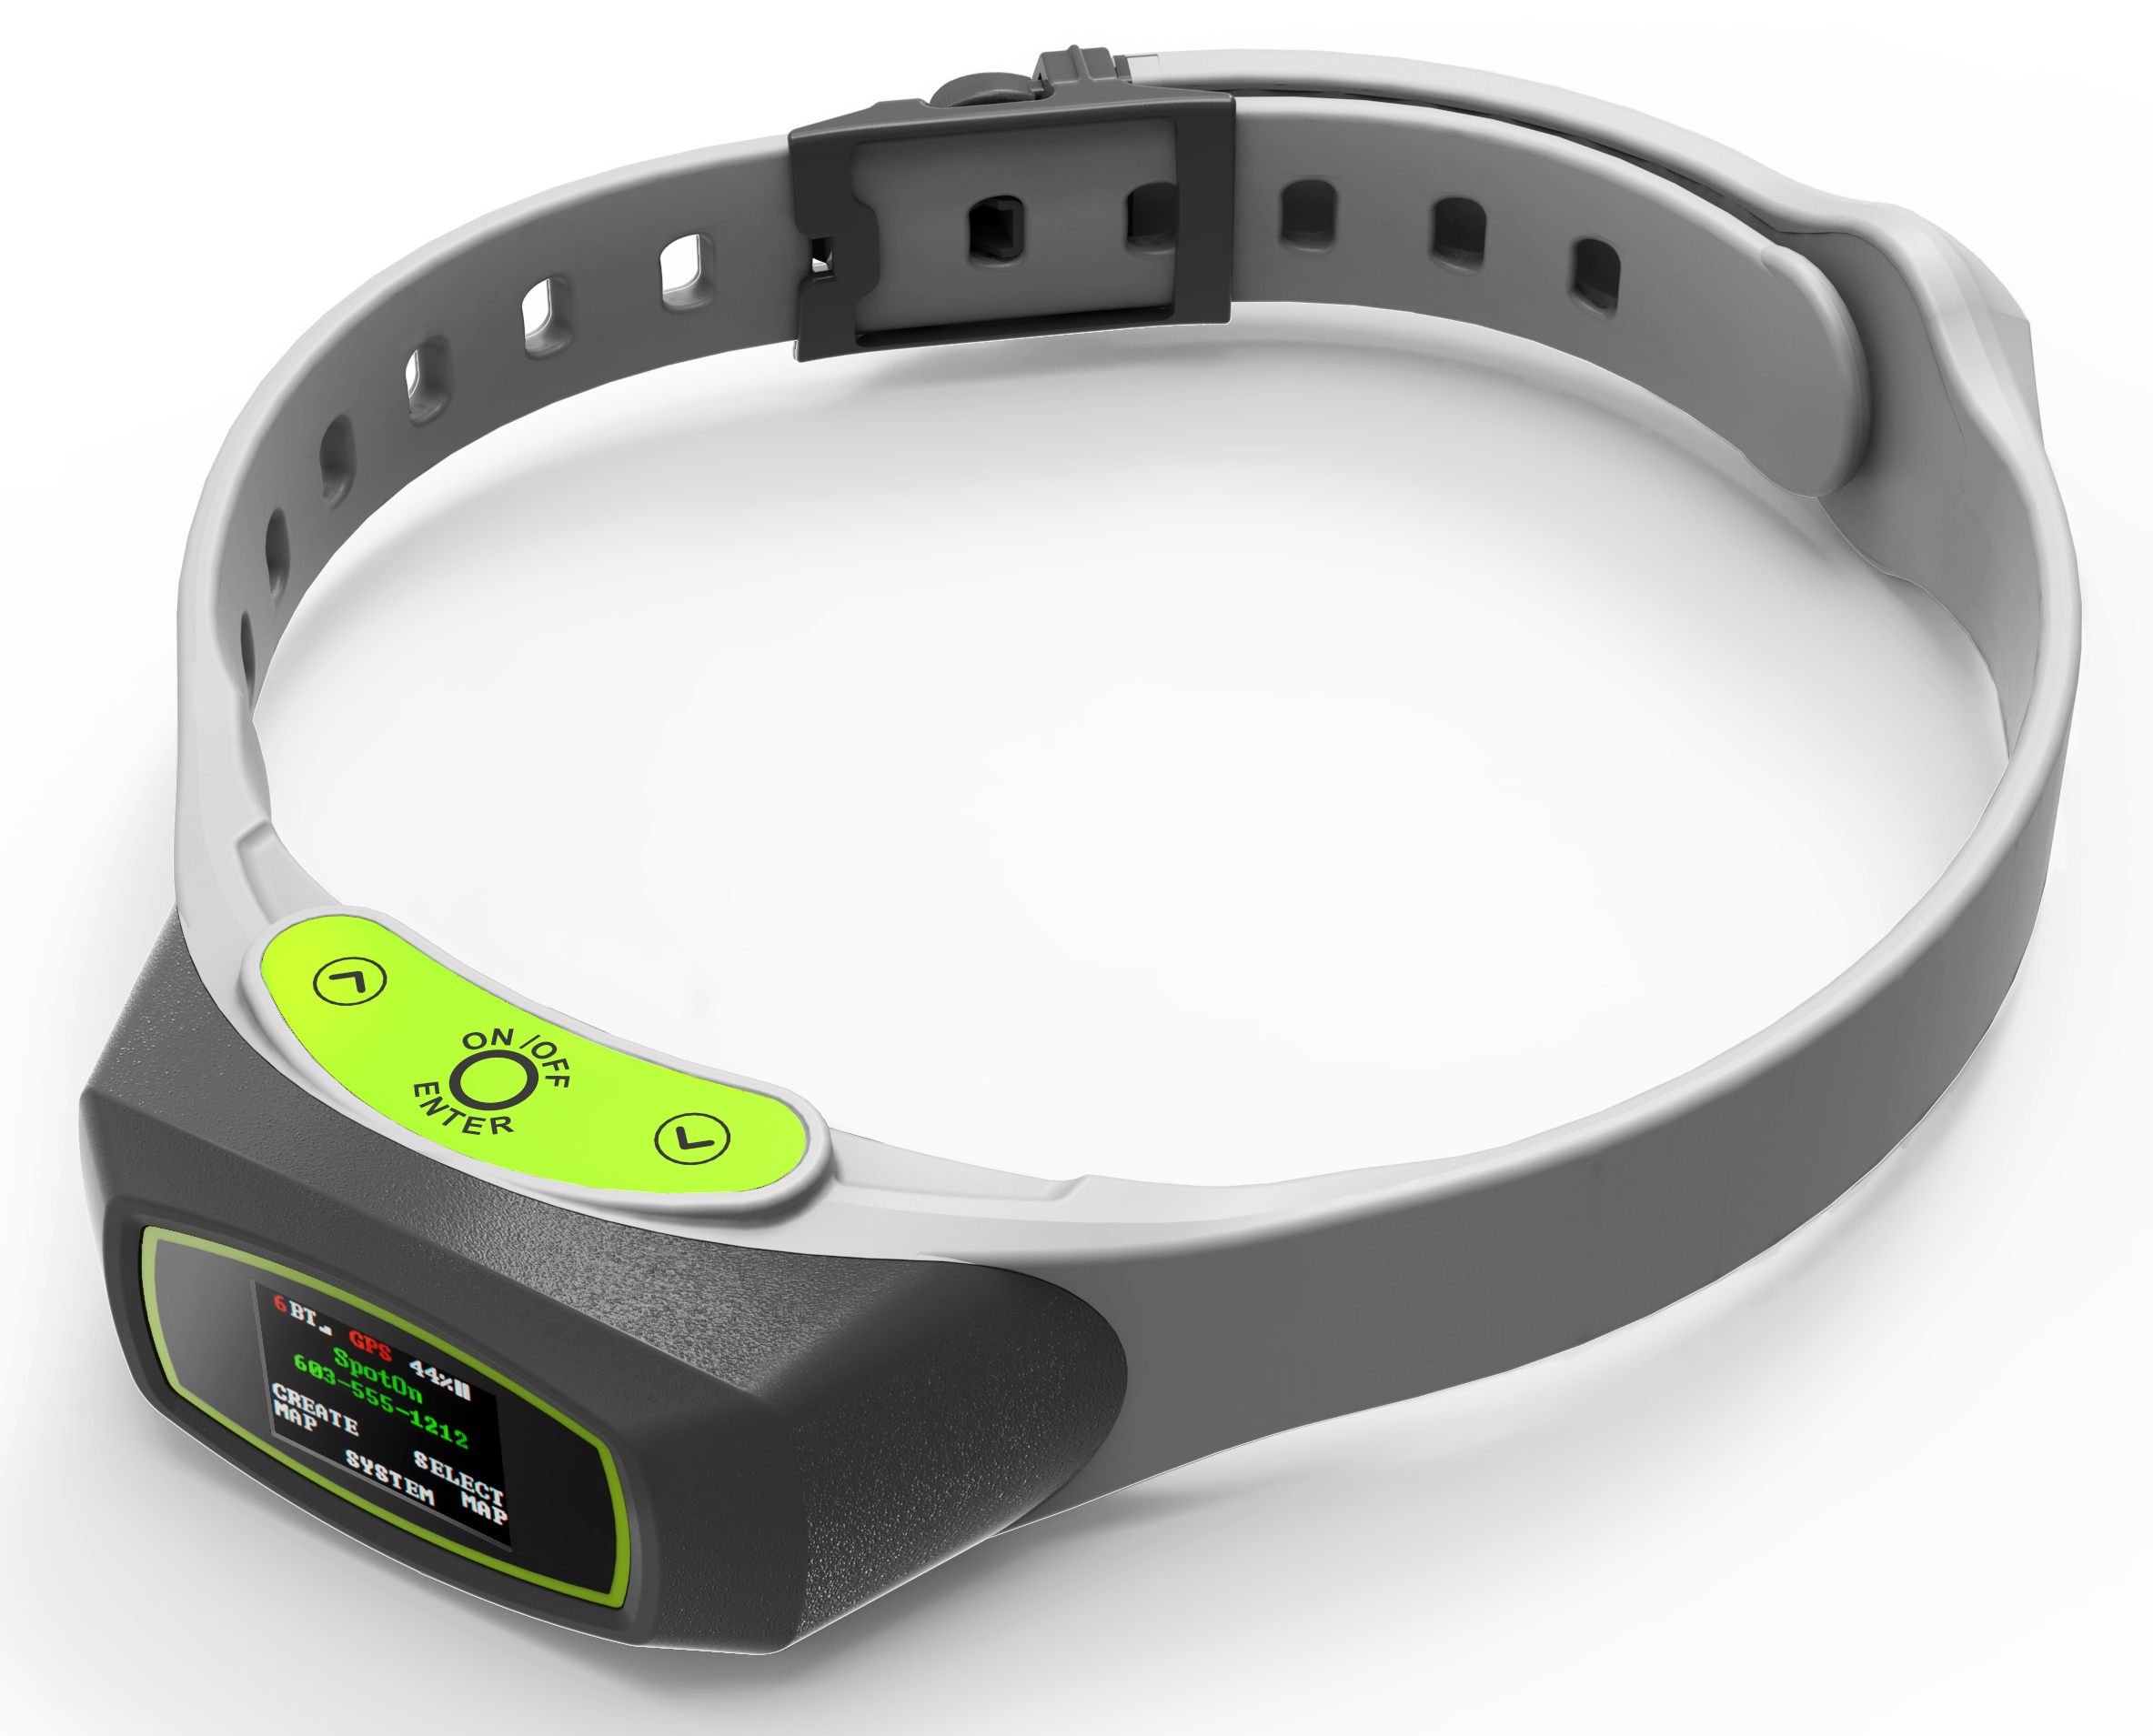 Why Would Medical Design Firm Eclipse be Asked to Design a Dog Collar?